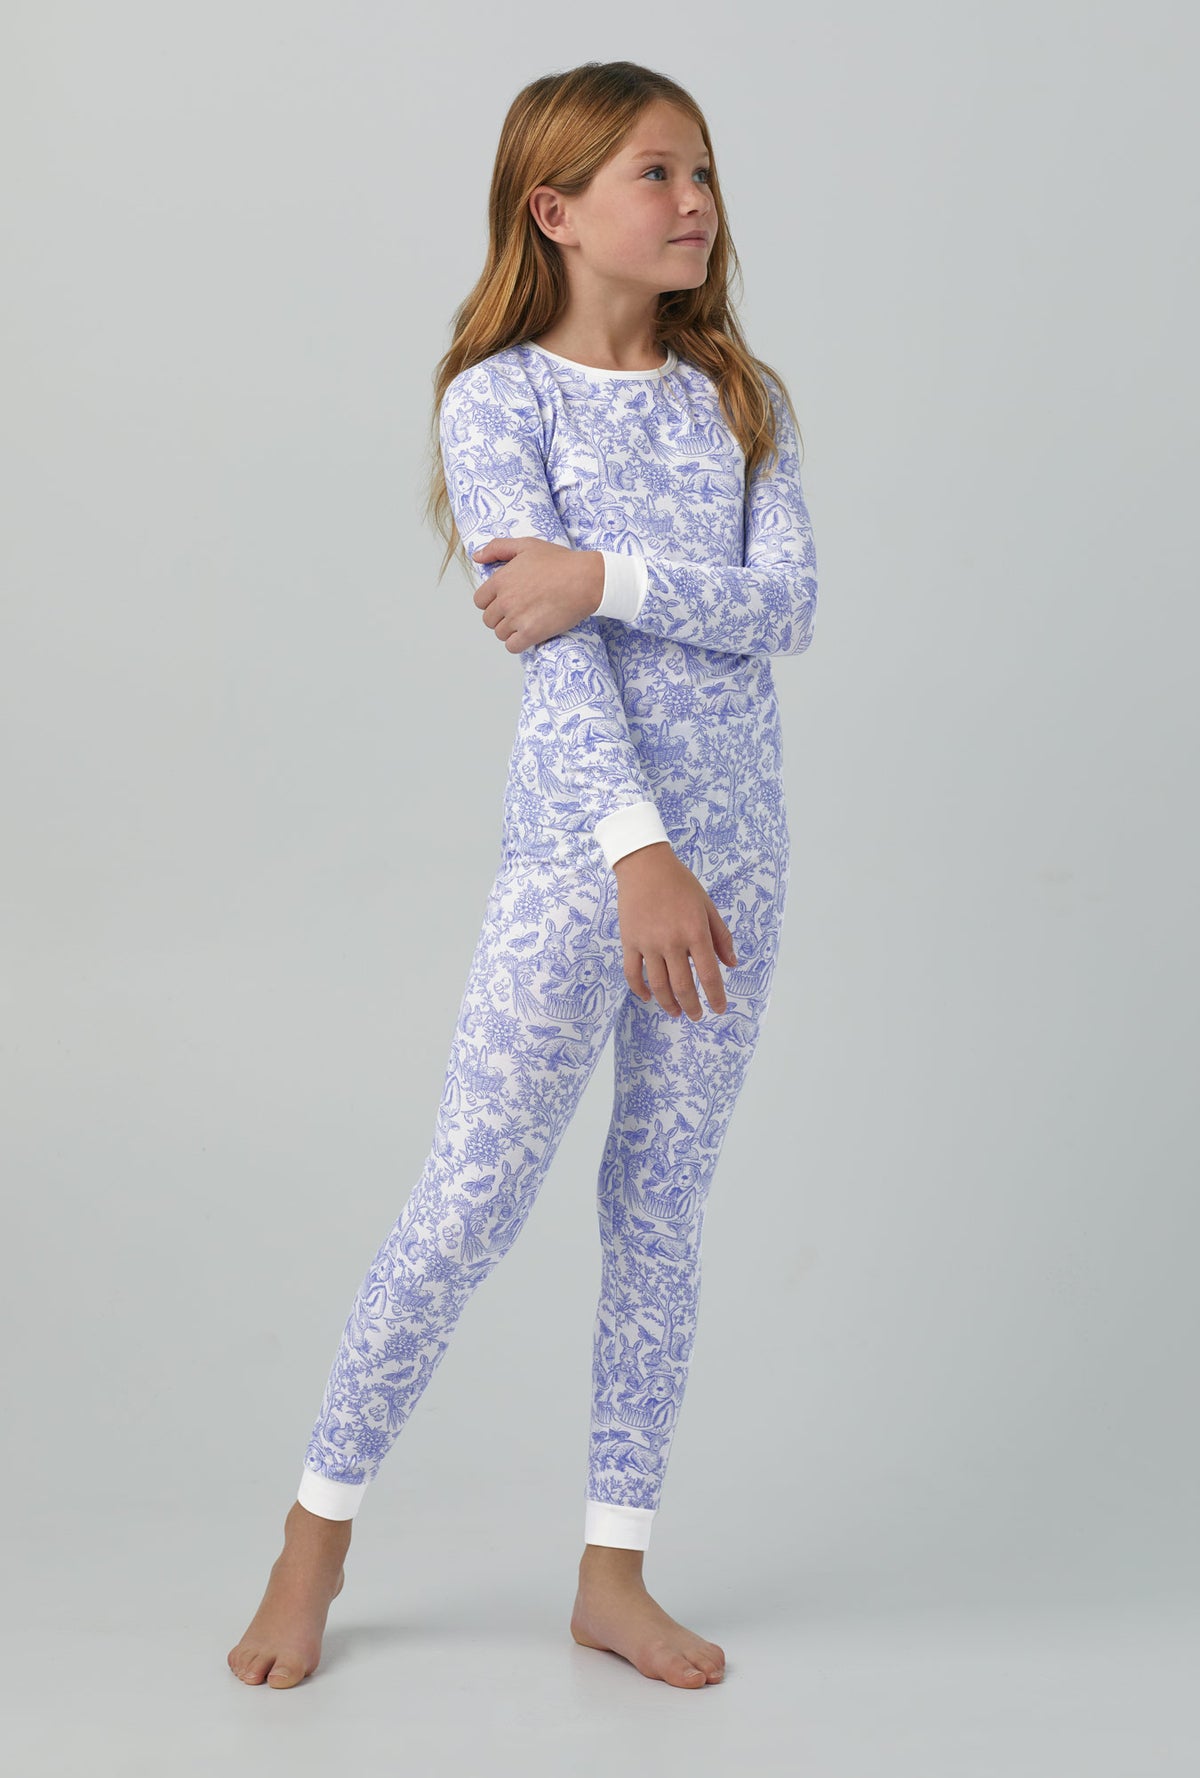 A girl wearing Long Sleeve Stretch Jersey Kids PJ Set with fairytale forest print